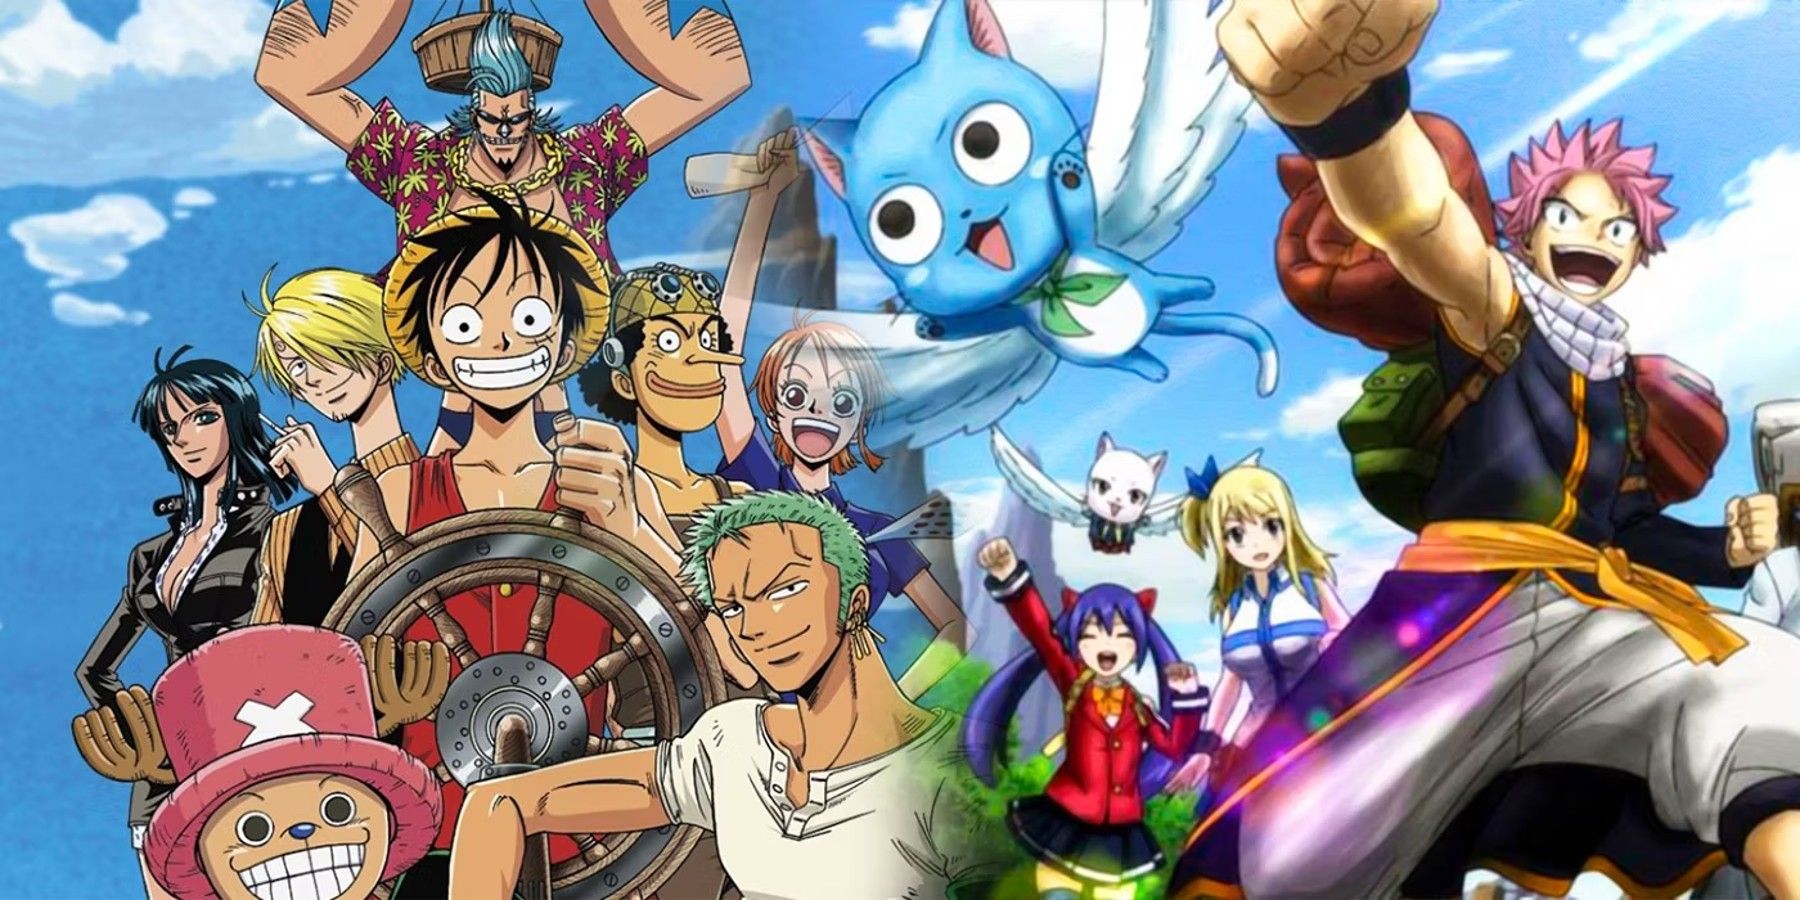 Fairy Tail and One Piece both emphasize on emotional connection to